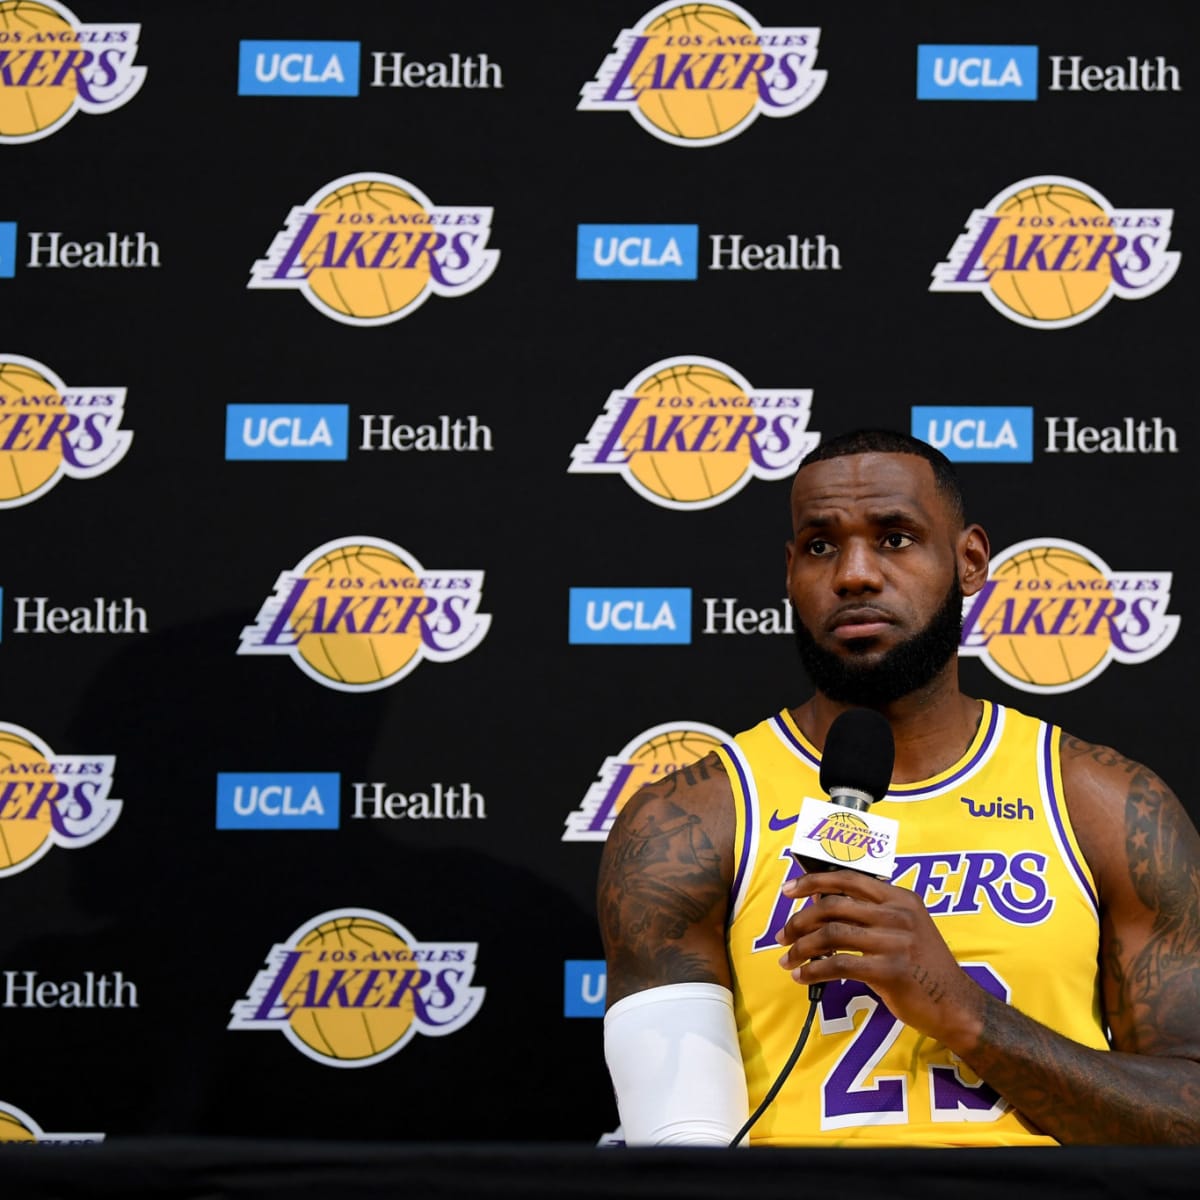 Insane Lakers media day quotes that you have to see to believe